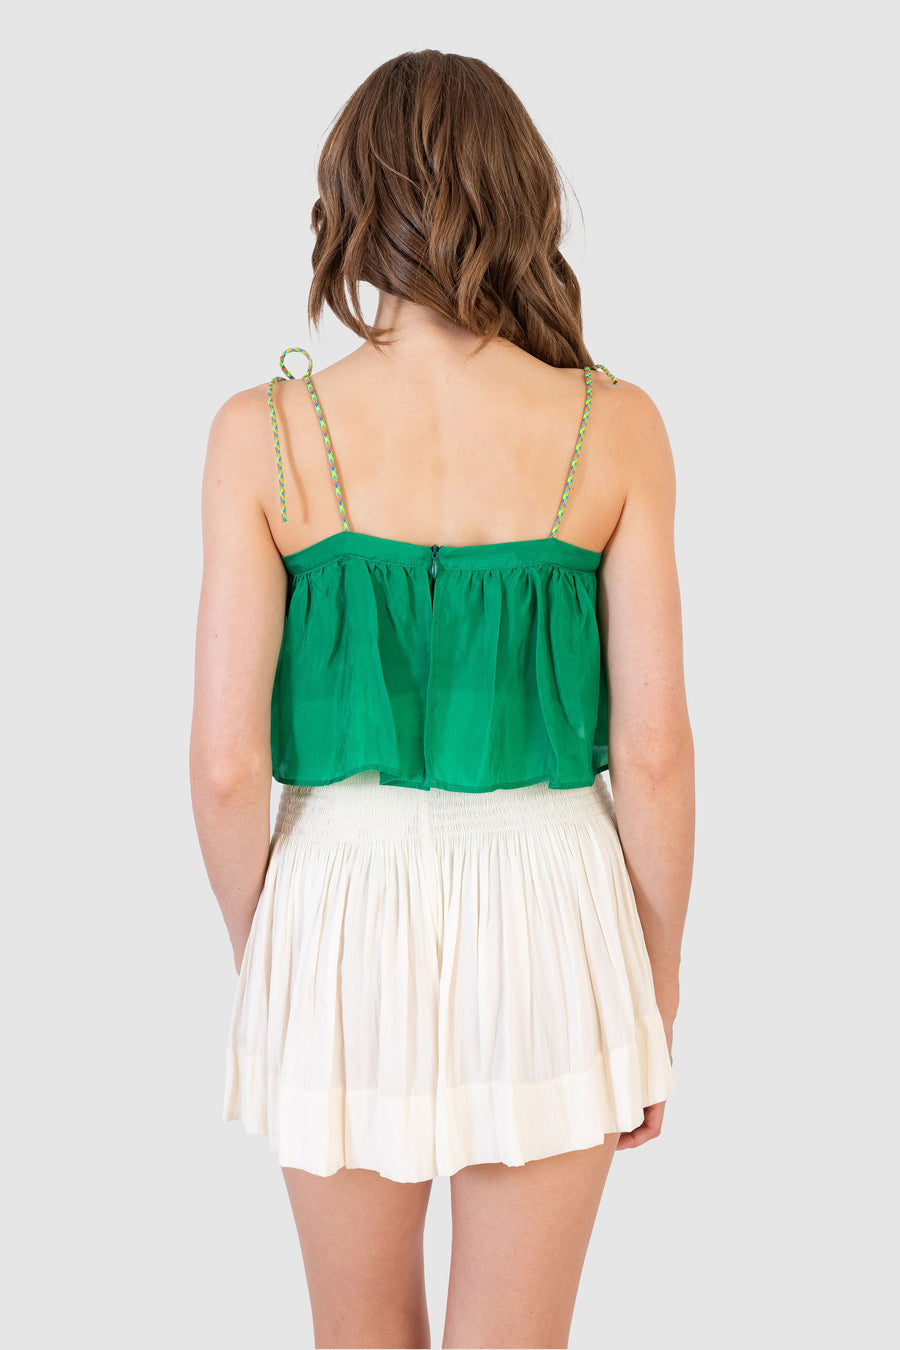 Lola Top Summer Green *Limited*Edition*